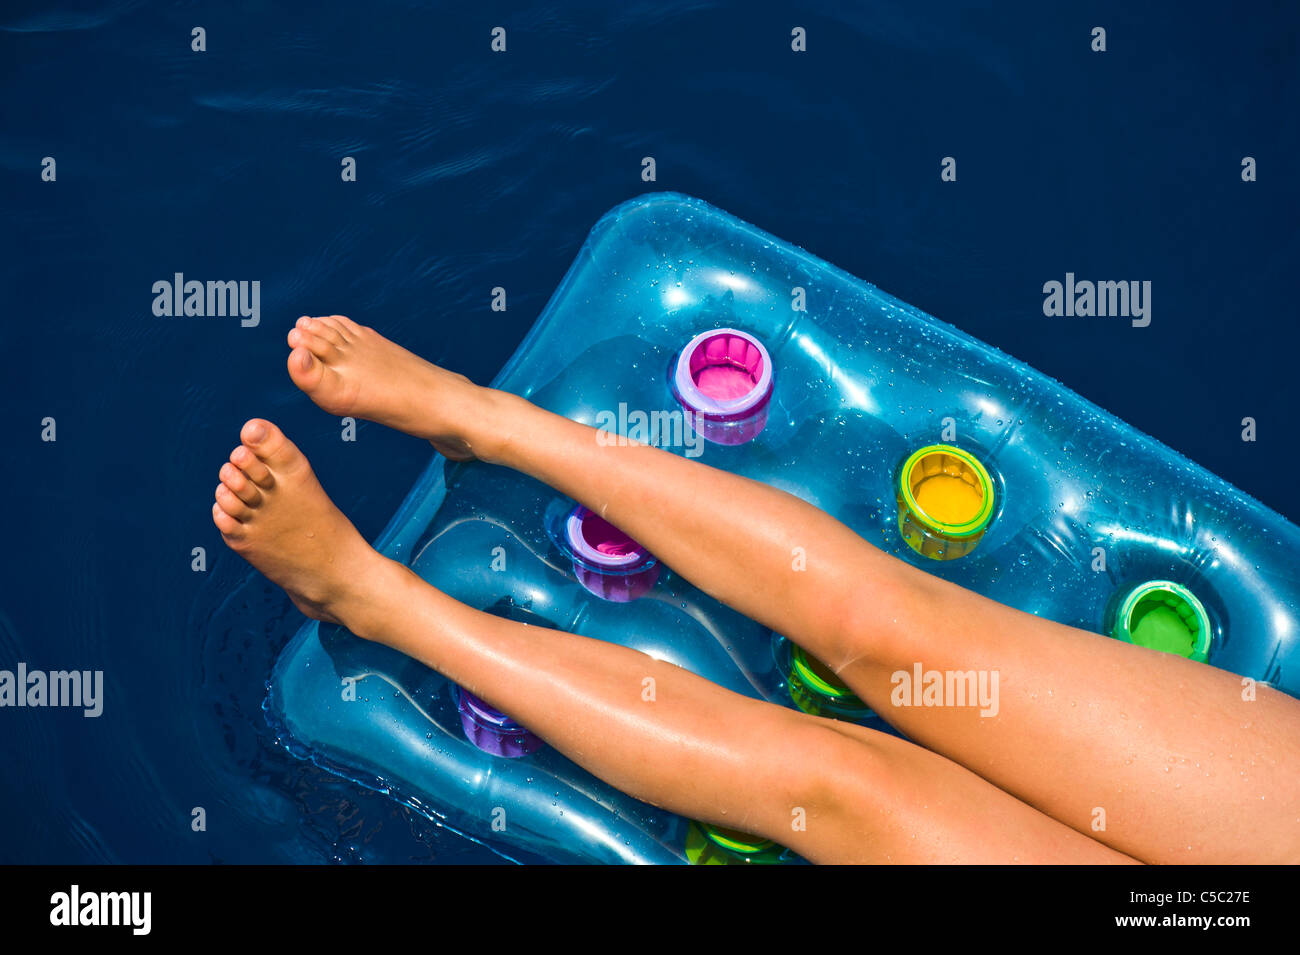 Beautiful woman's legs with bare feet on air mattress in the water Stock Photo